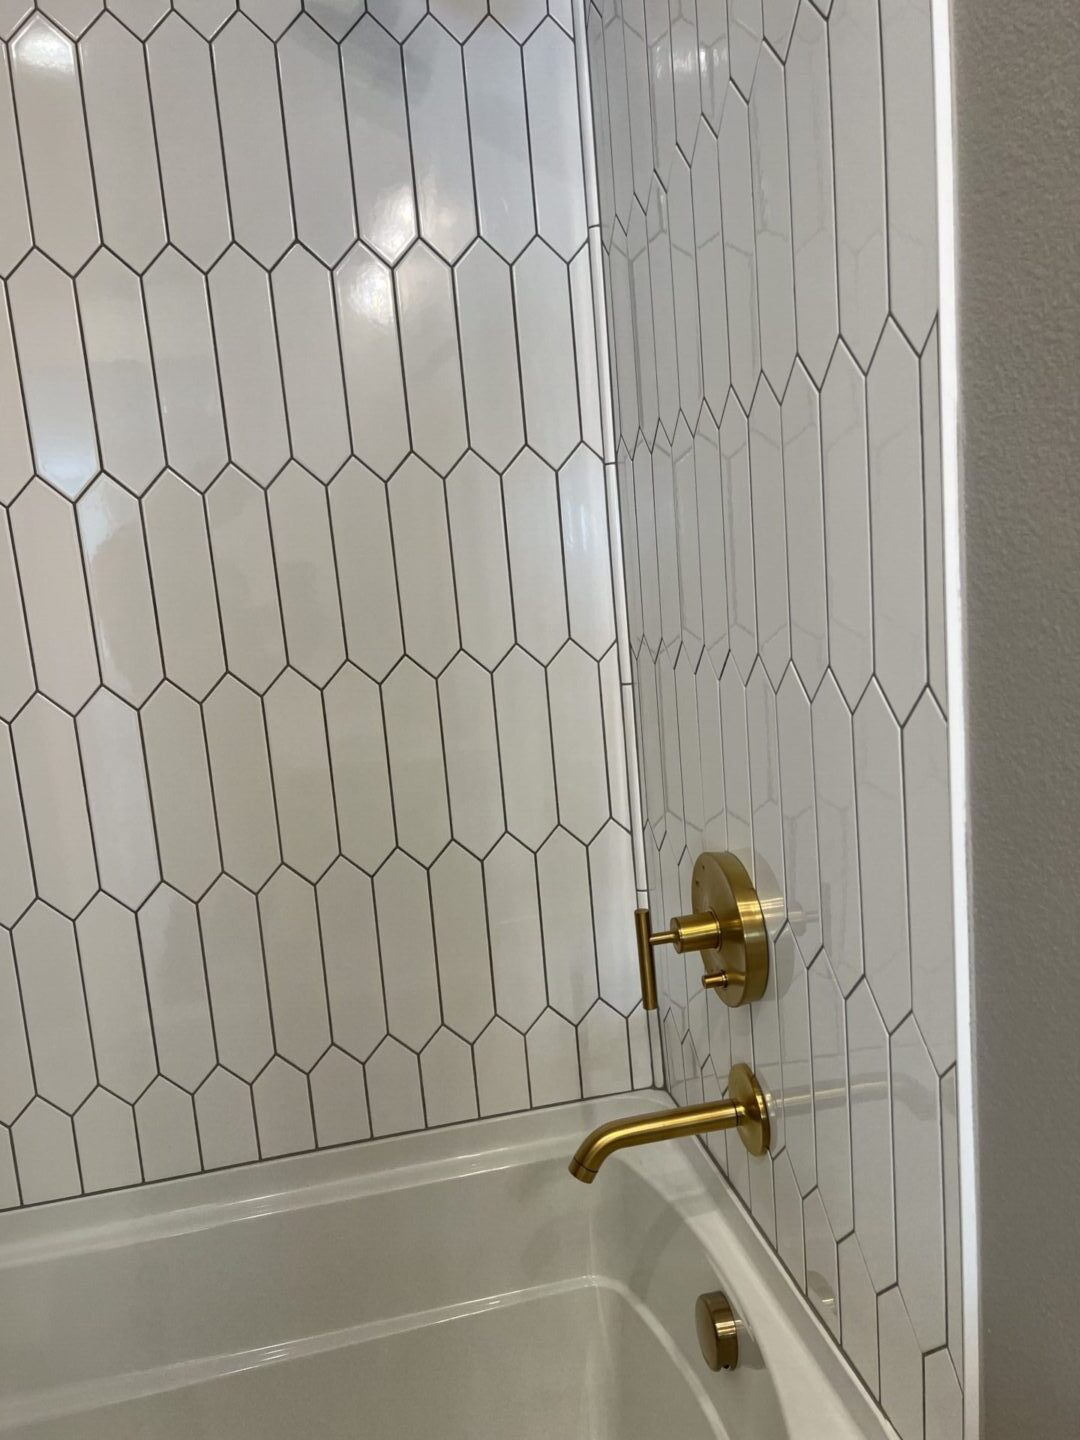 A bathroom with white tile and gold fixtures.